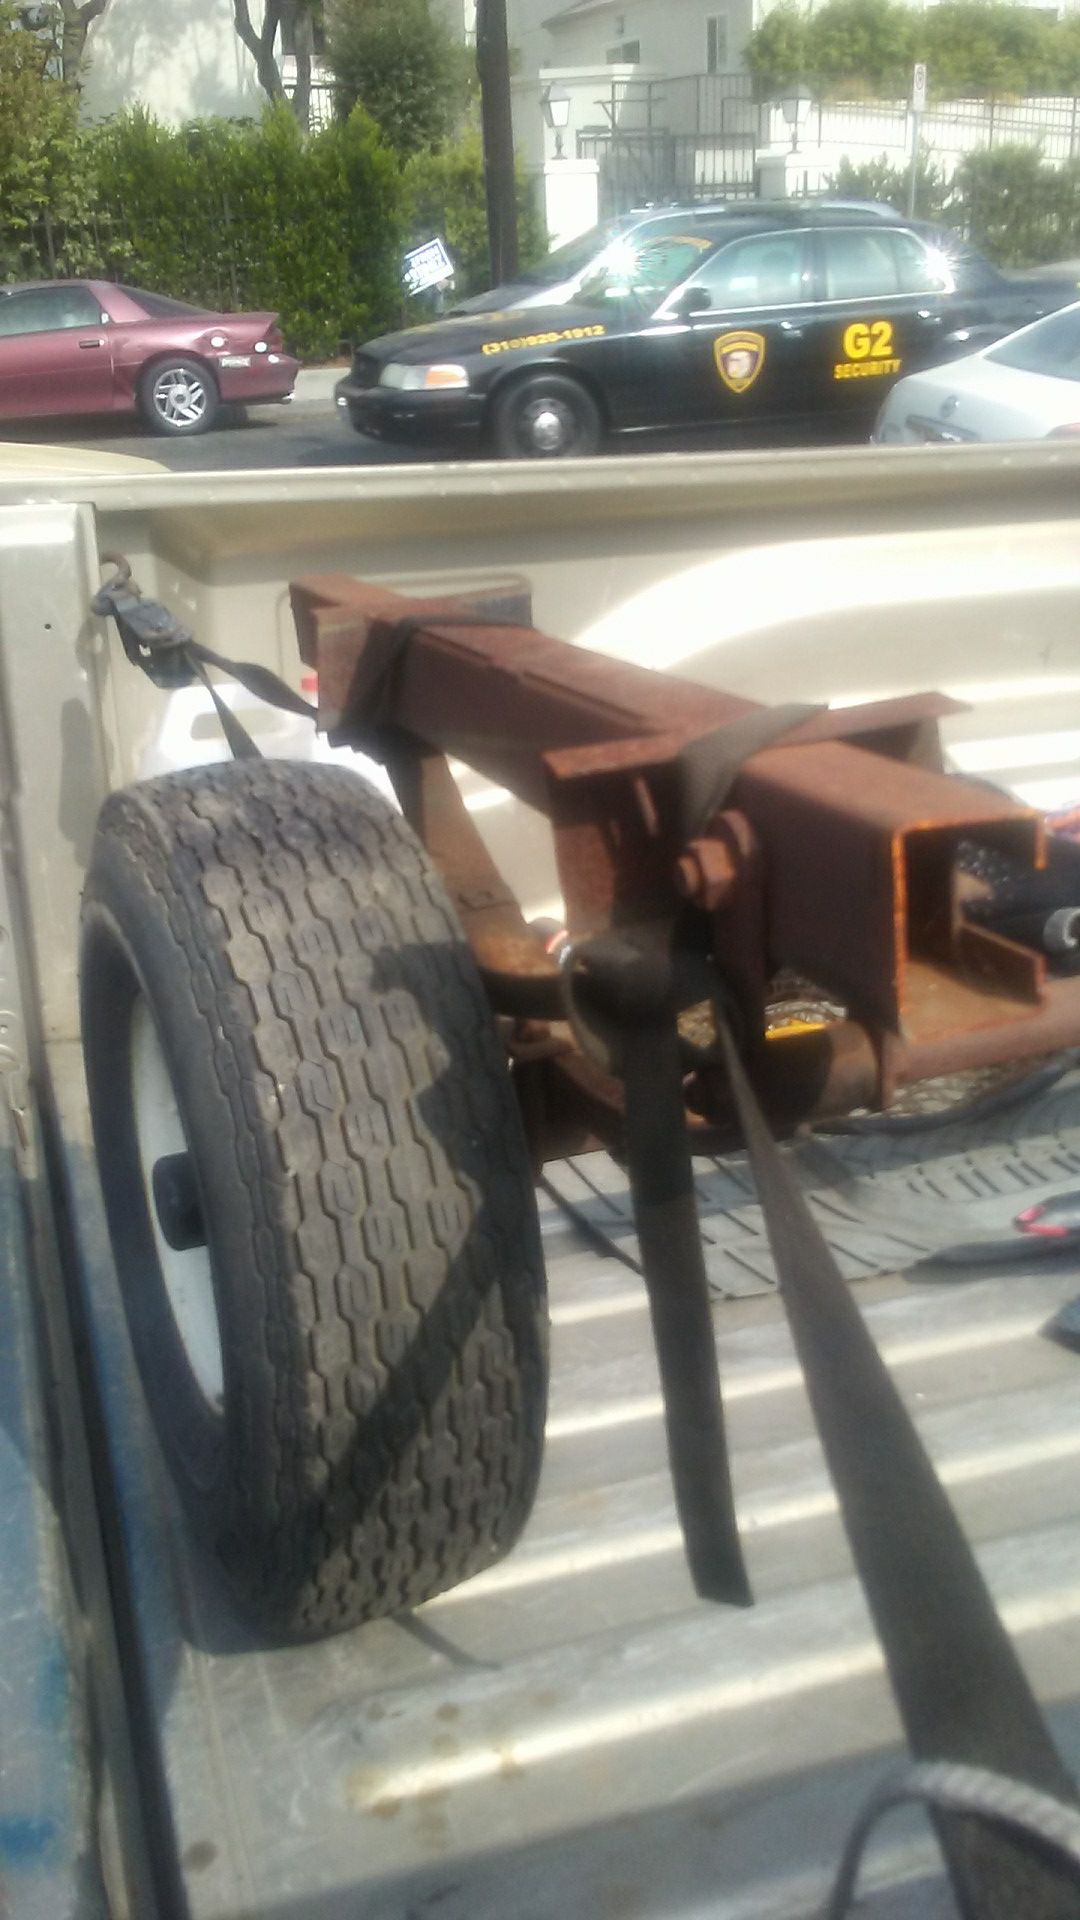 This is a trailer axle with. Leaf springs and shackles and wheels and tires